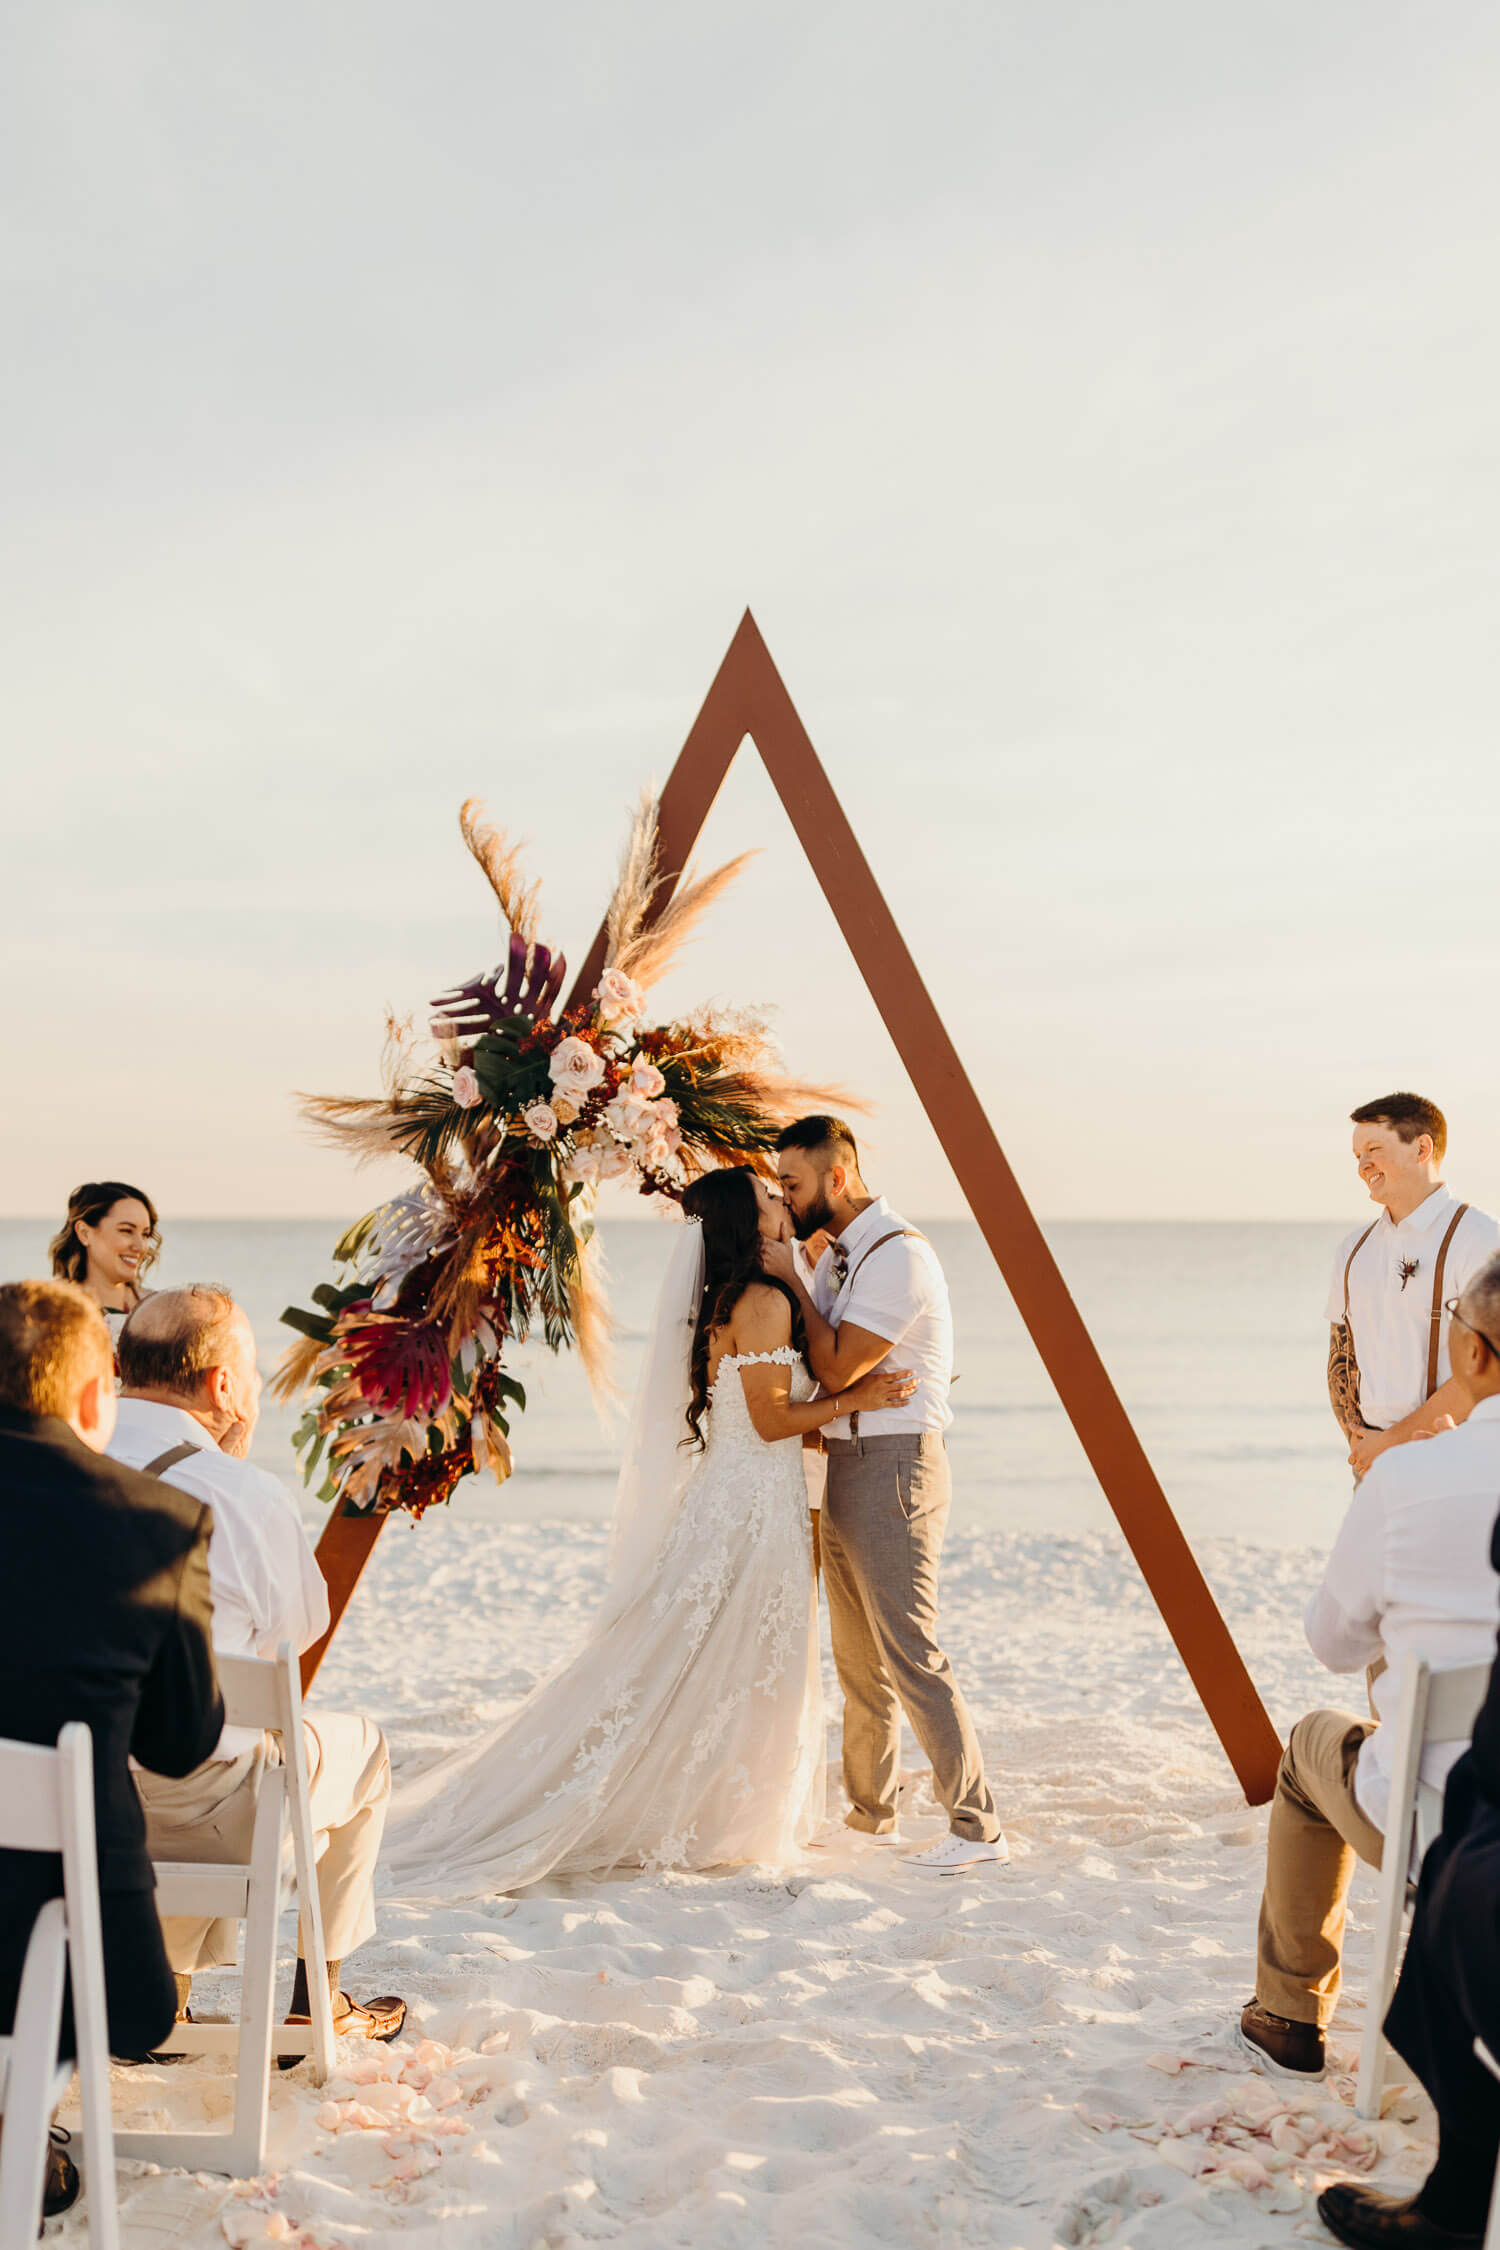 How To Plan A Destination Wedding- 10 Tips To Consider